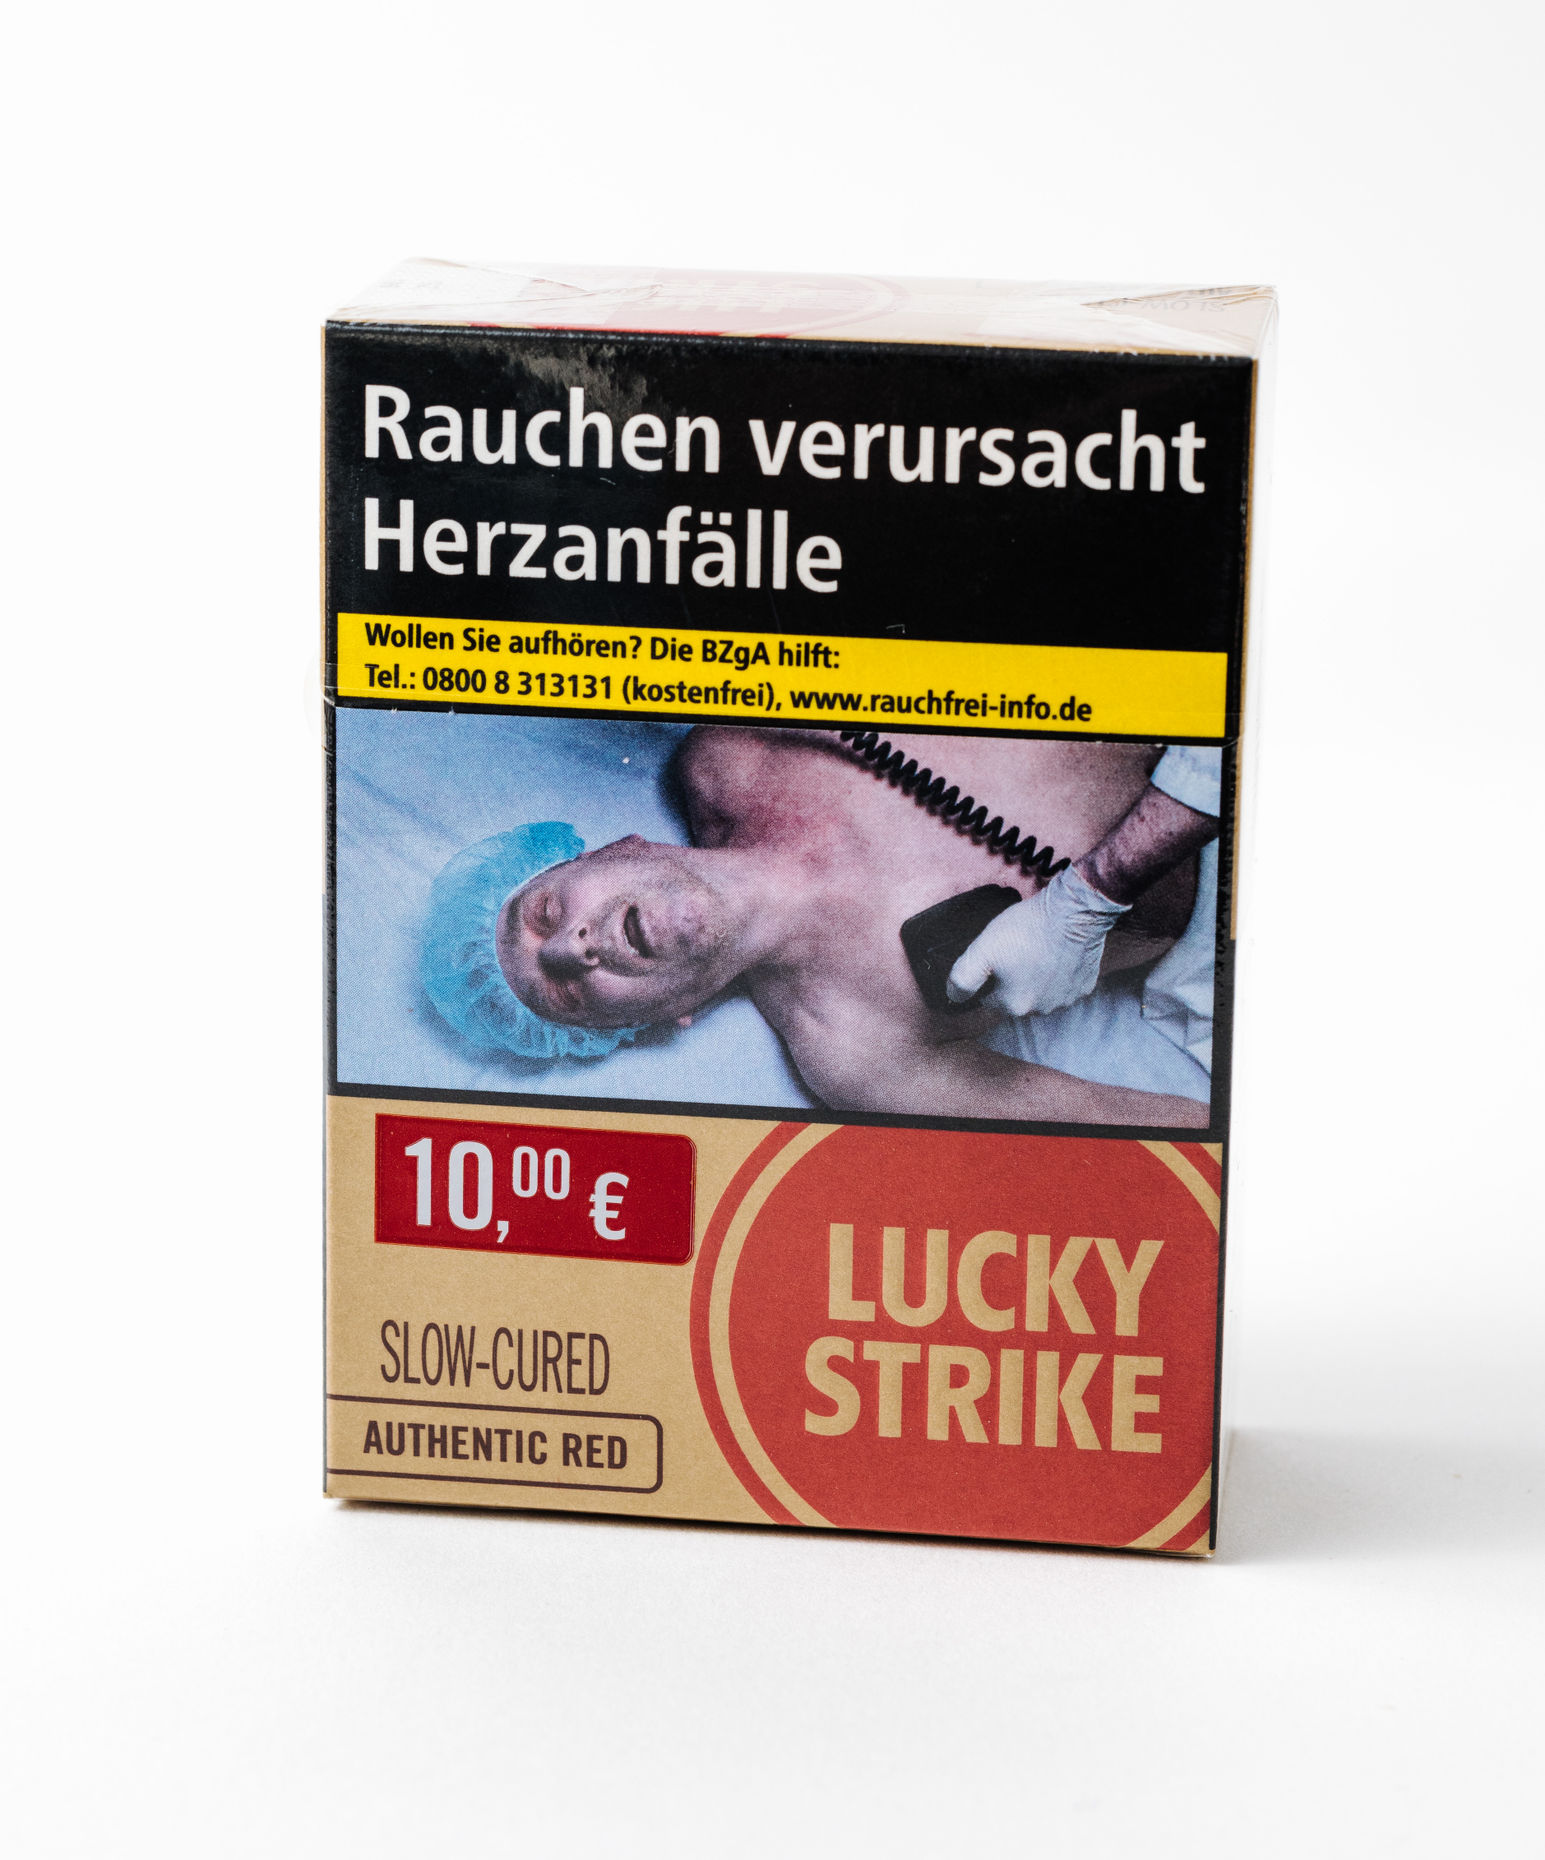 Product, Lucky Strike Cigarettes (Authentic Red)